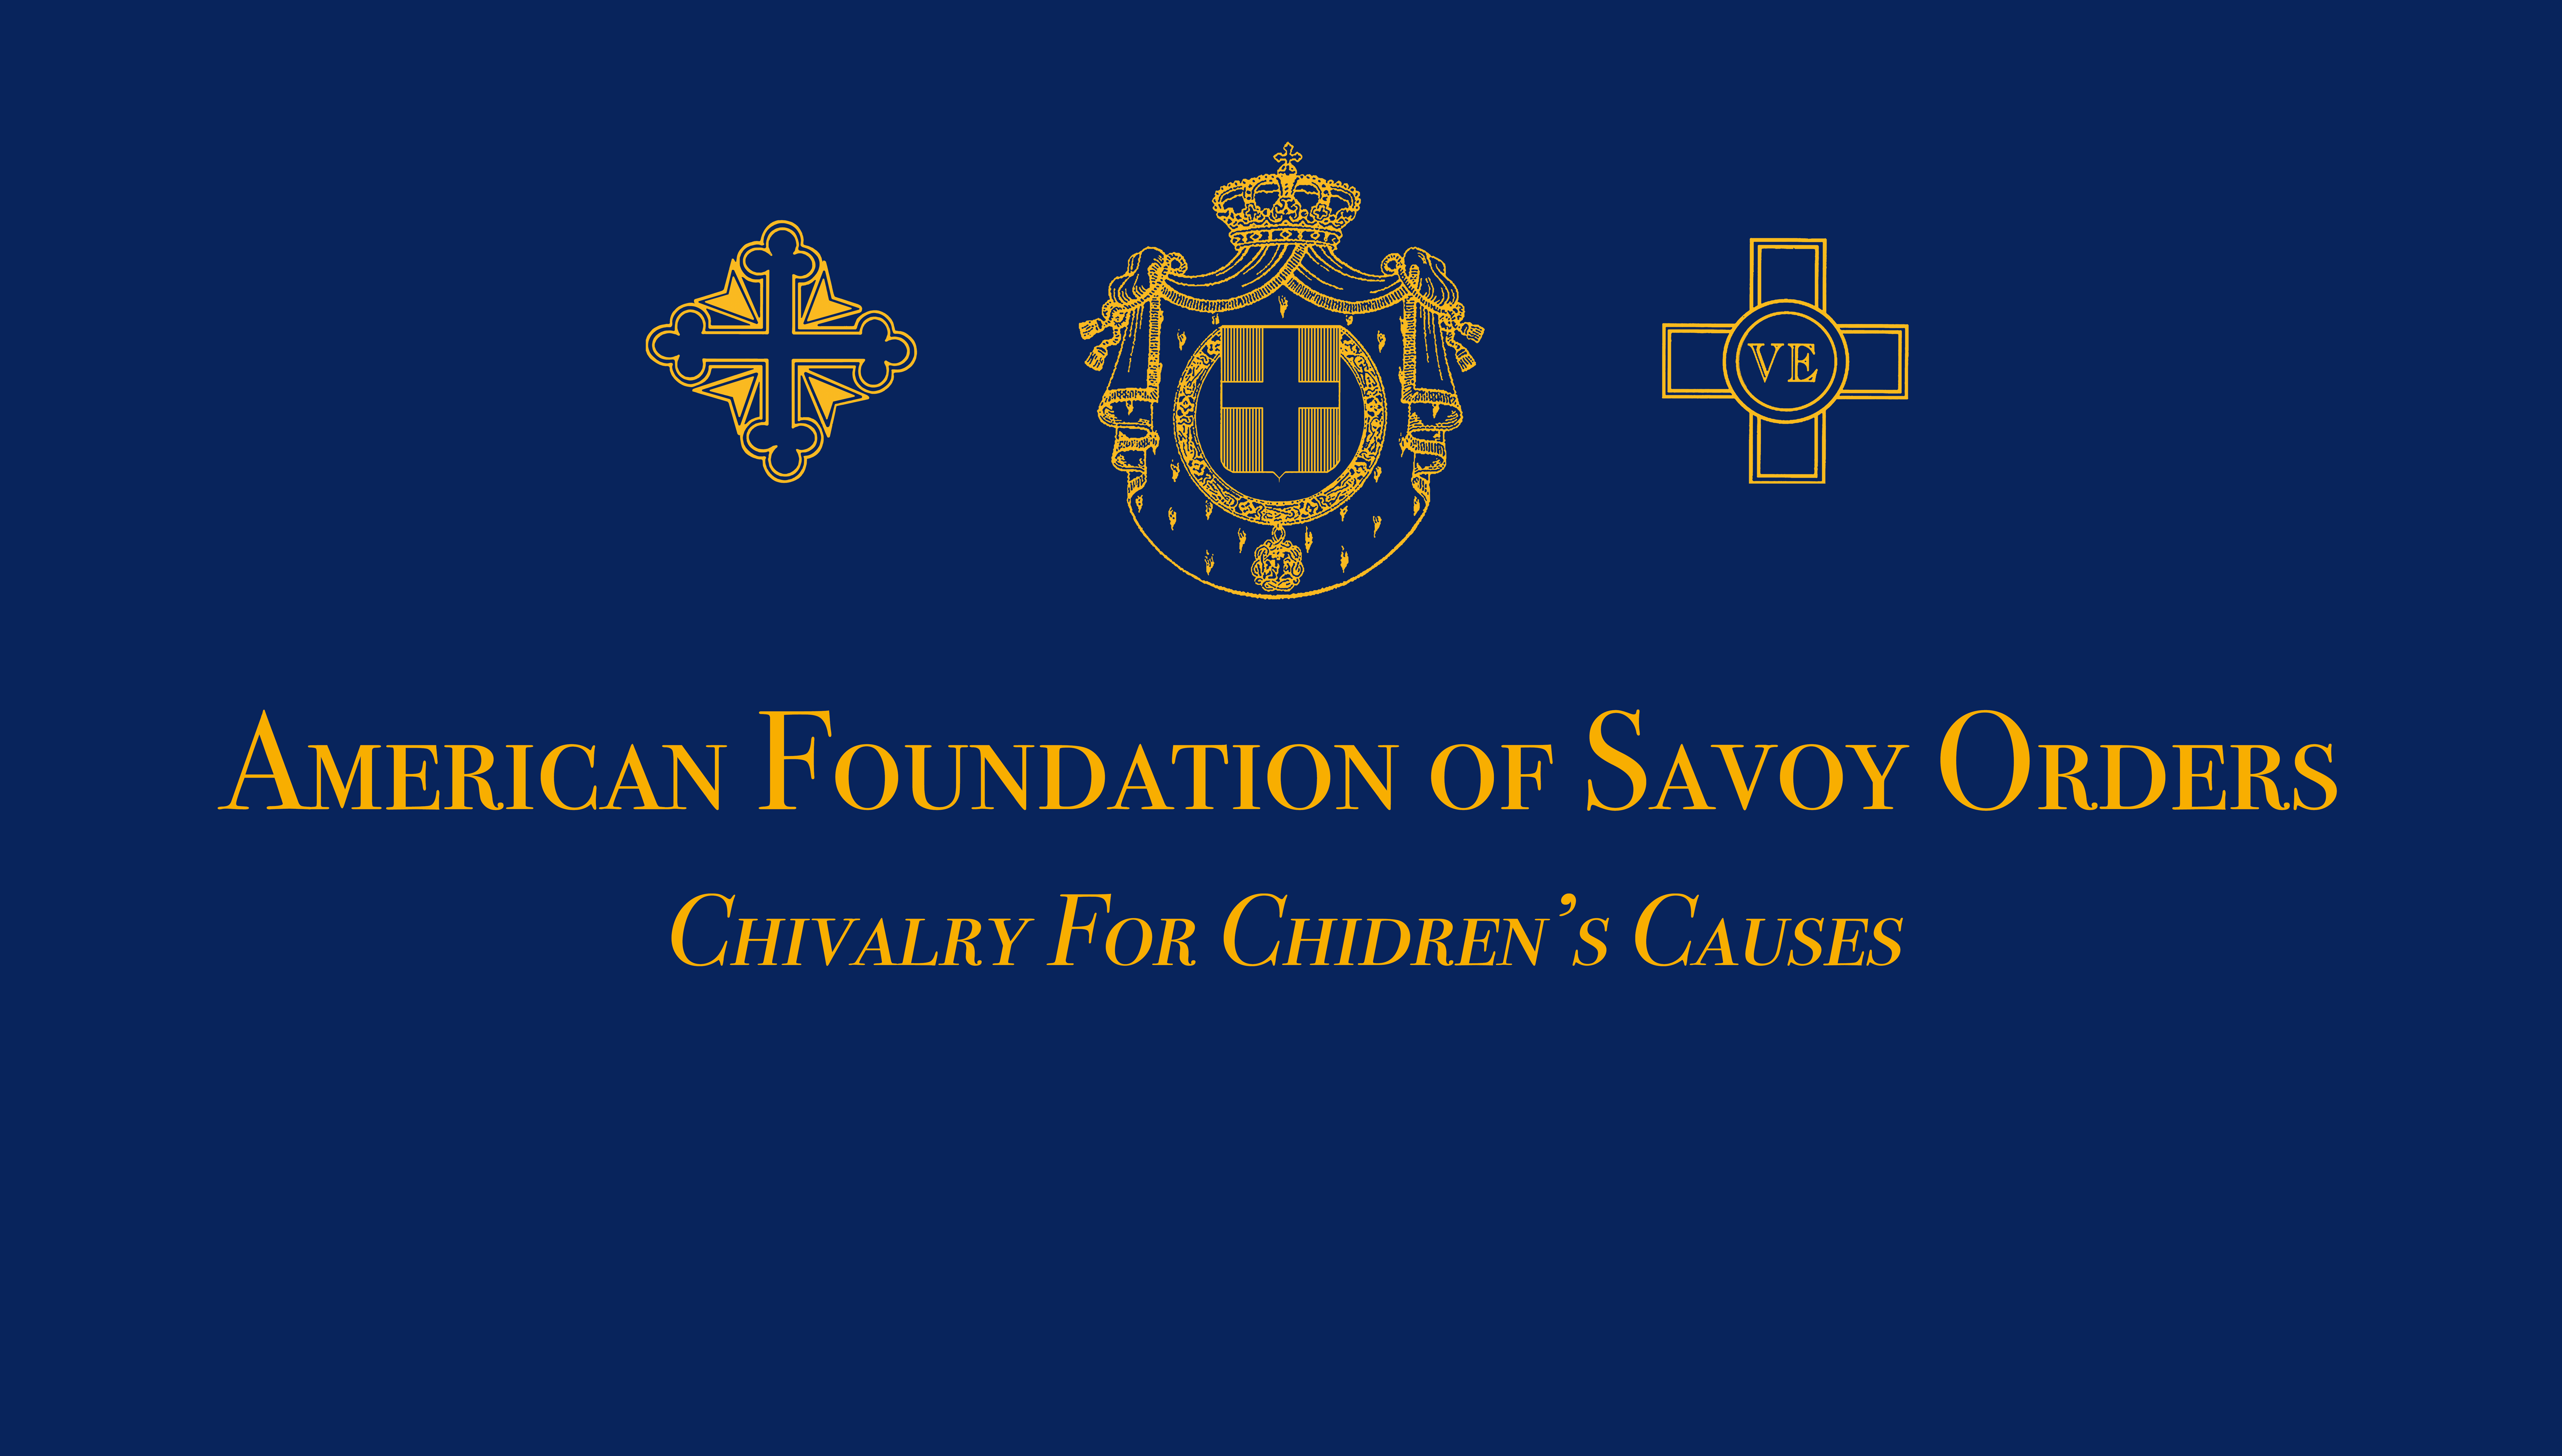 AMERICAN FOUNDATION OF SAVOY ORDERS, INCORPORATED